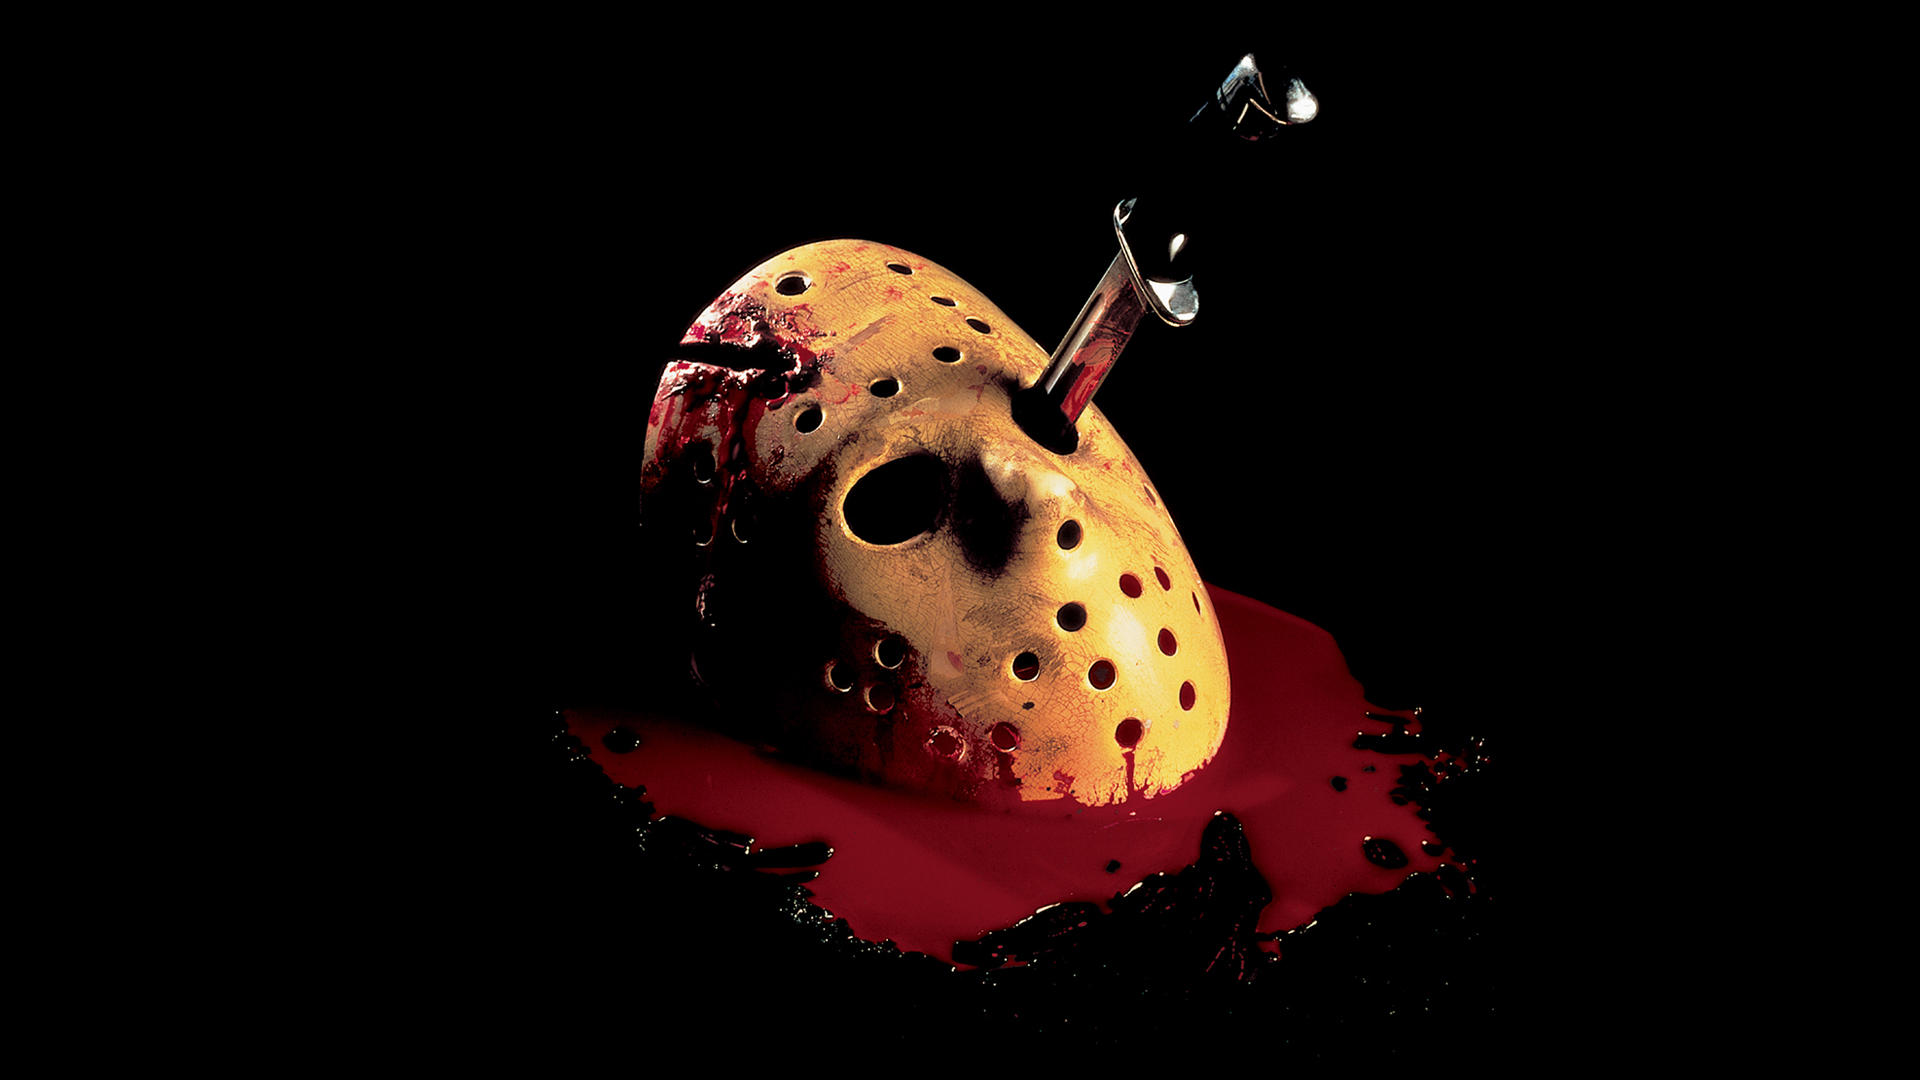 friday the 13th: the final chapter, movie High Definition image